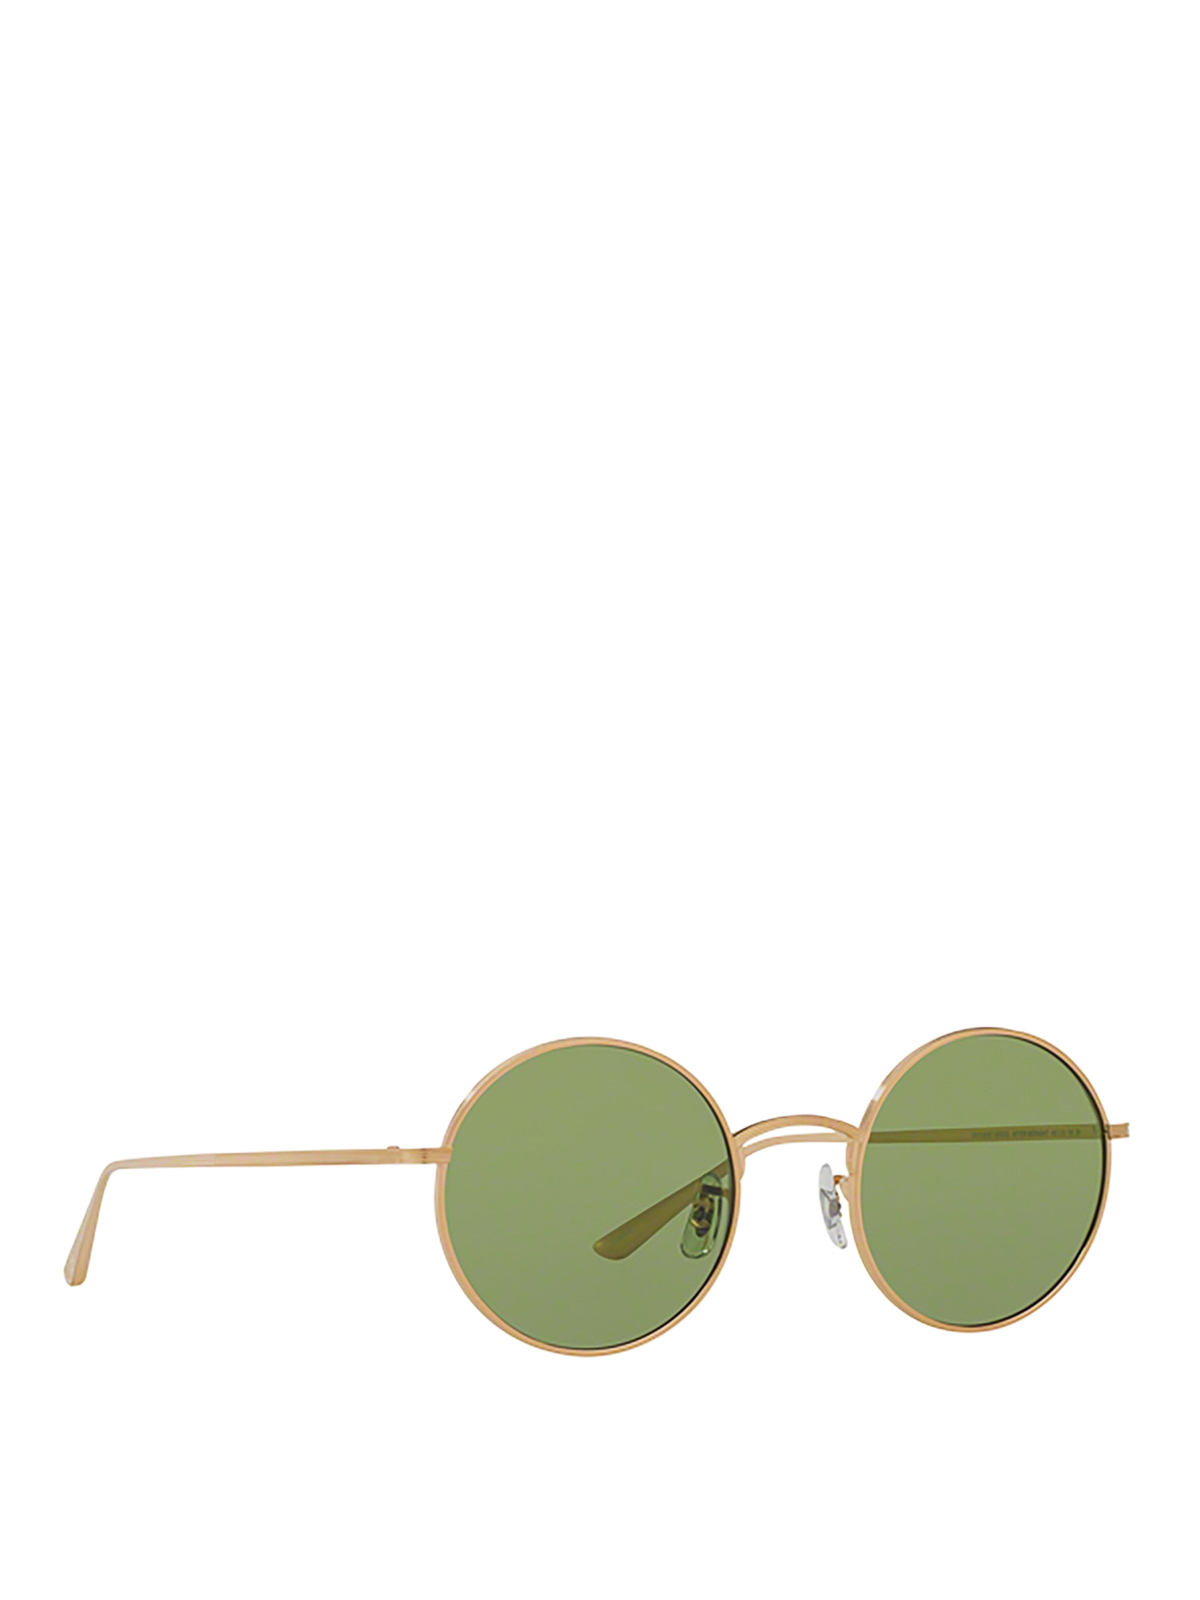 Sunglasses Oliver Peoples - The Row after Midnight round